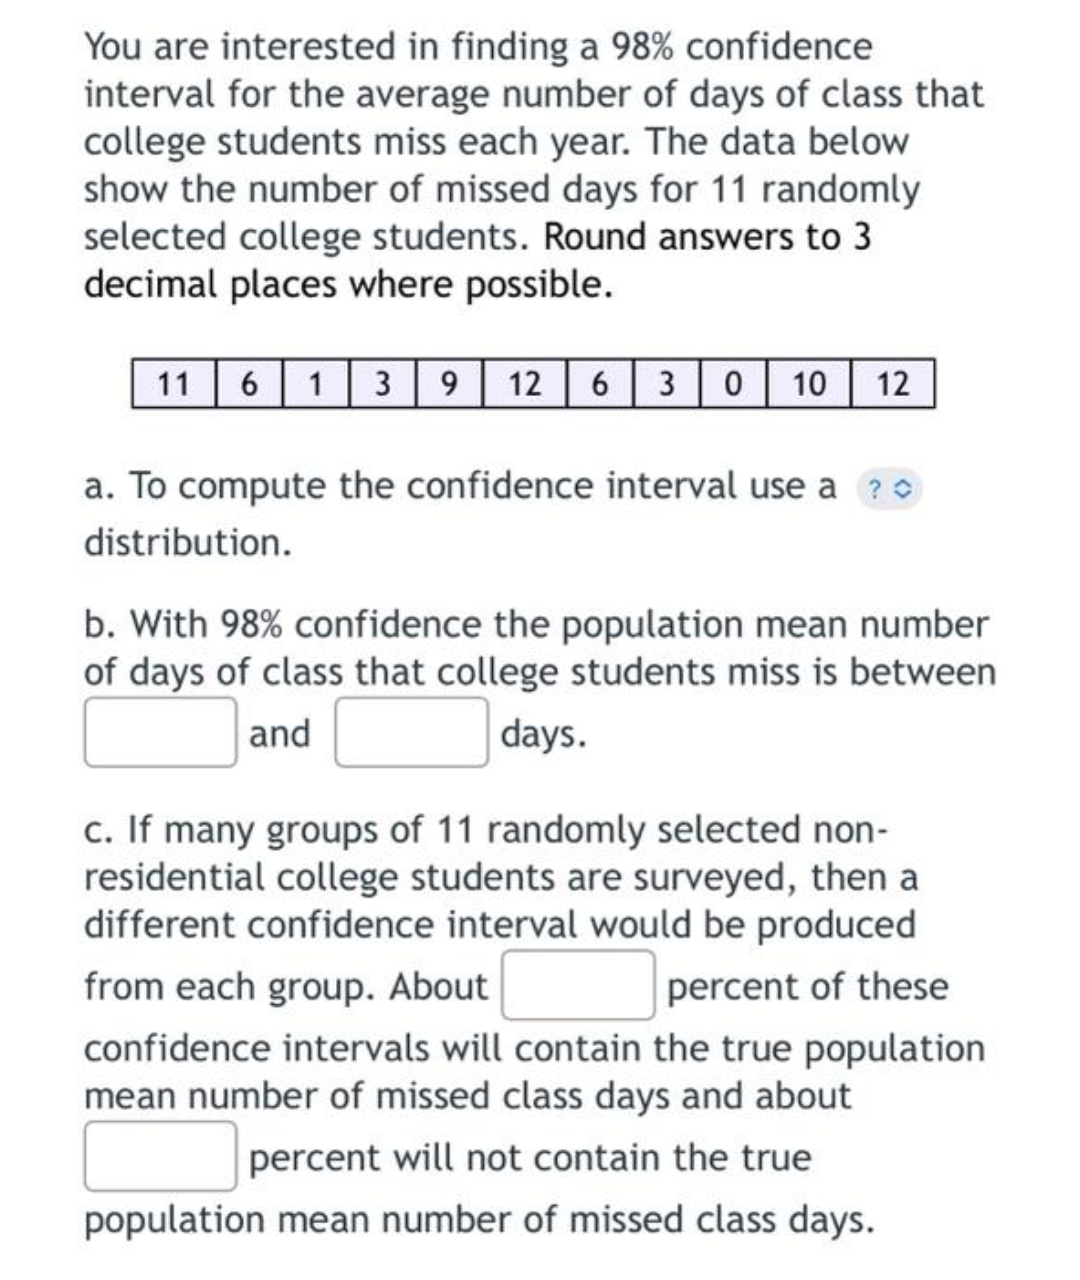 You are interested in finding a 98% confidence
interval for the average number of days of class that
college students miss each year. The data below
show the number of missed days for 11 randomly
selected college students. Round answers to 3
decimal places where possible.
11
6 1 3 9 12 6 30 10 12
a. To compute the confidence interval use a?
distribution.
b. With 98% confidence the population mean number
of days of class that college students miss is between
and
days.
c. If many groups of 11 randomly selected non-
residential college students are surveyed, then a
different confidence interval would be produced
from each group. About
percent of these
confidence intervals will contain the true population
mean number of missed class days and about
percent will not contain the true
population mean number of missed class days.